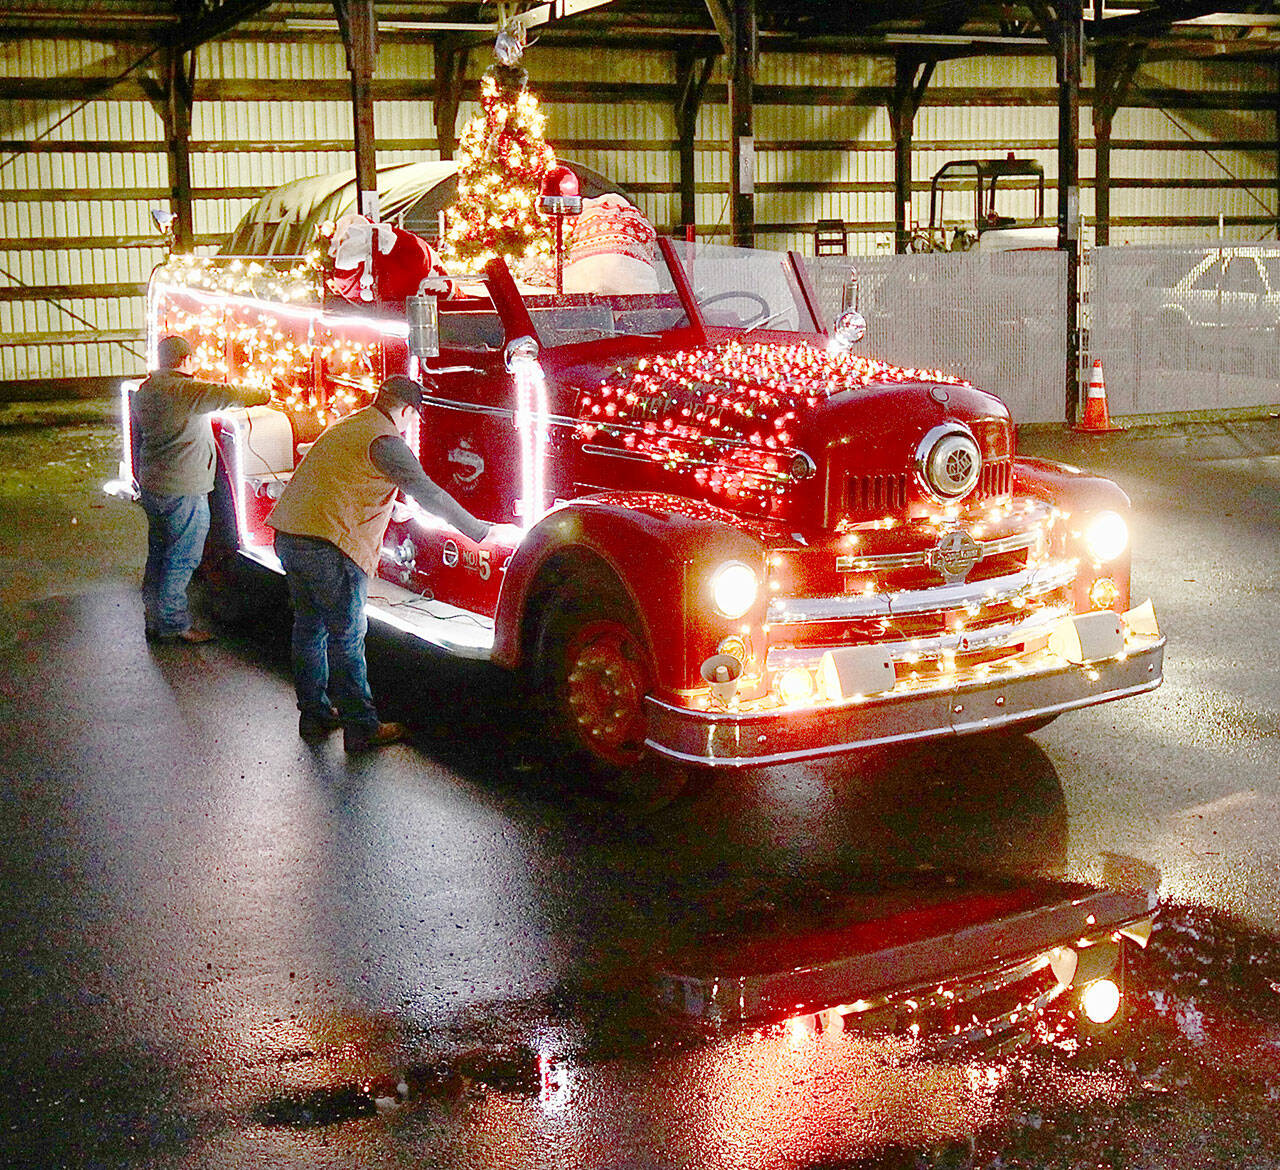 Tyler Gage and Adam DeFilippo decorate the 1956 Seagrave fire engine in 2022. (Dave Logan/For Peninsula Daily News)